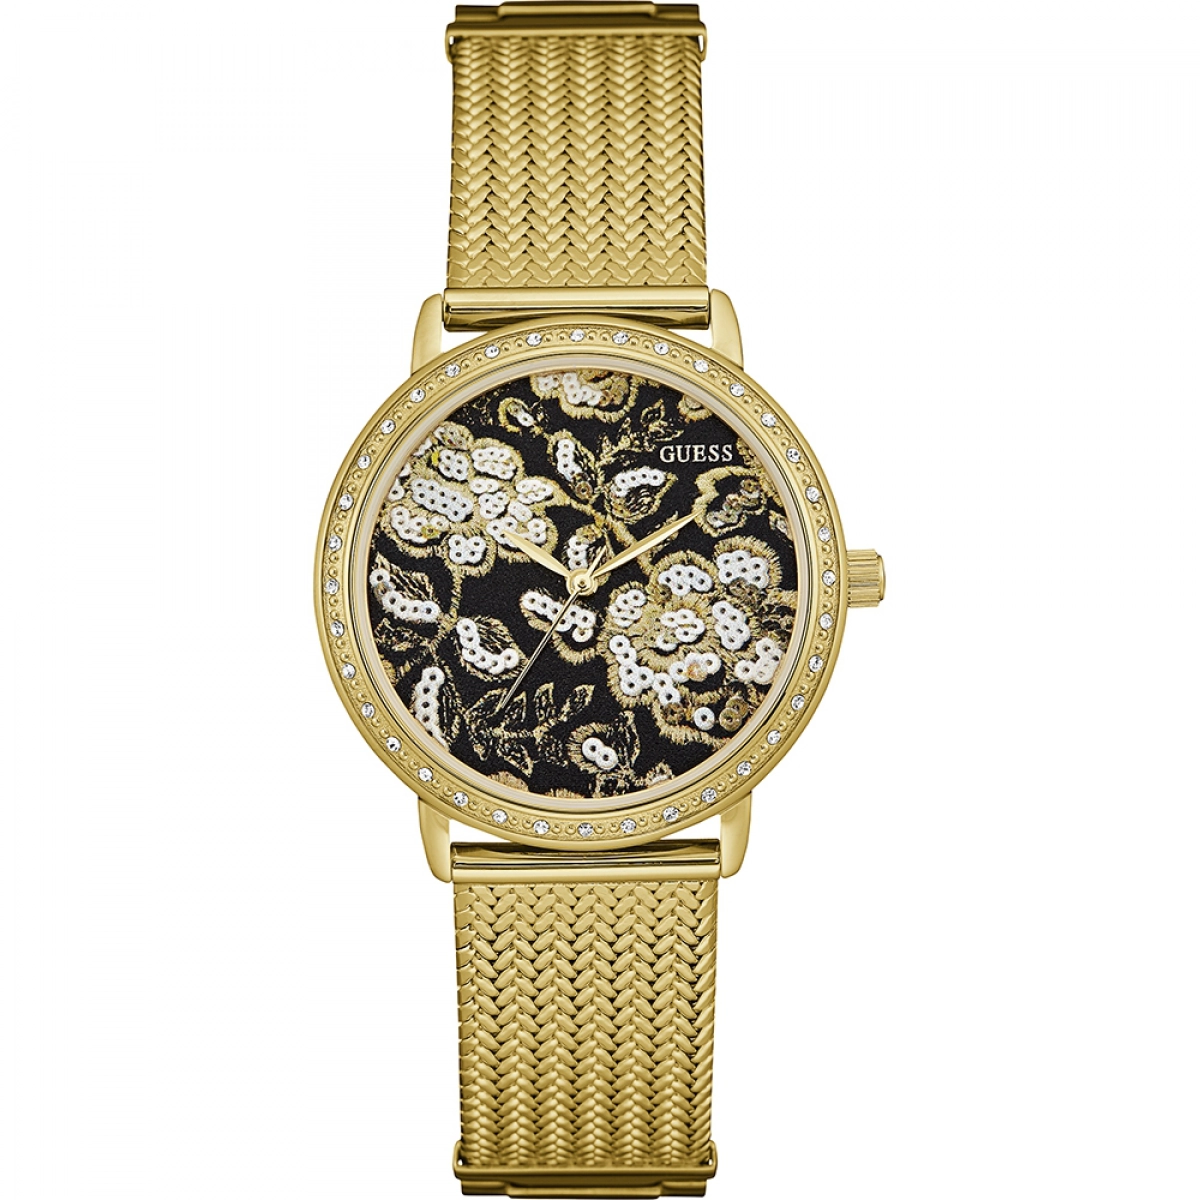 WATCH WOMAN'S STAINLESS STEEL YELLOW DIAL FLORAL W0822L2 GUESS